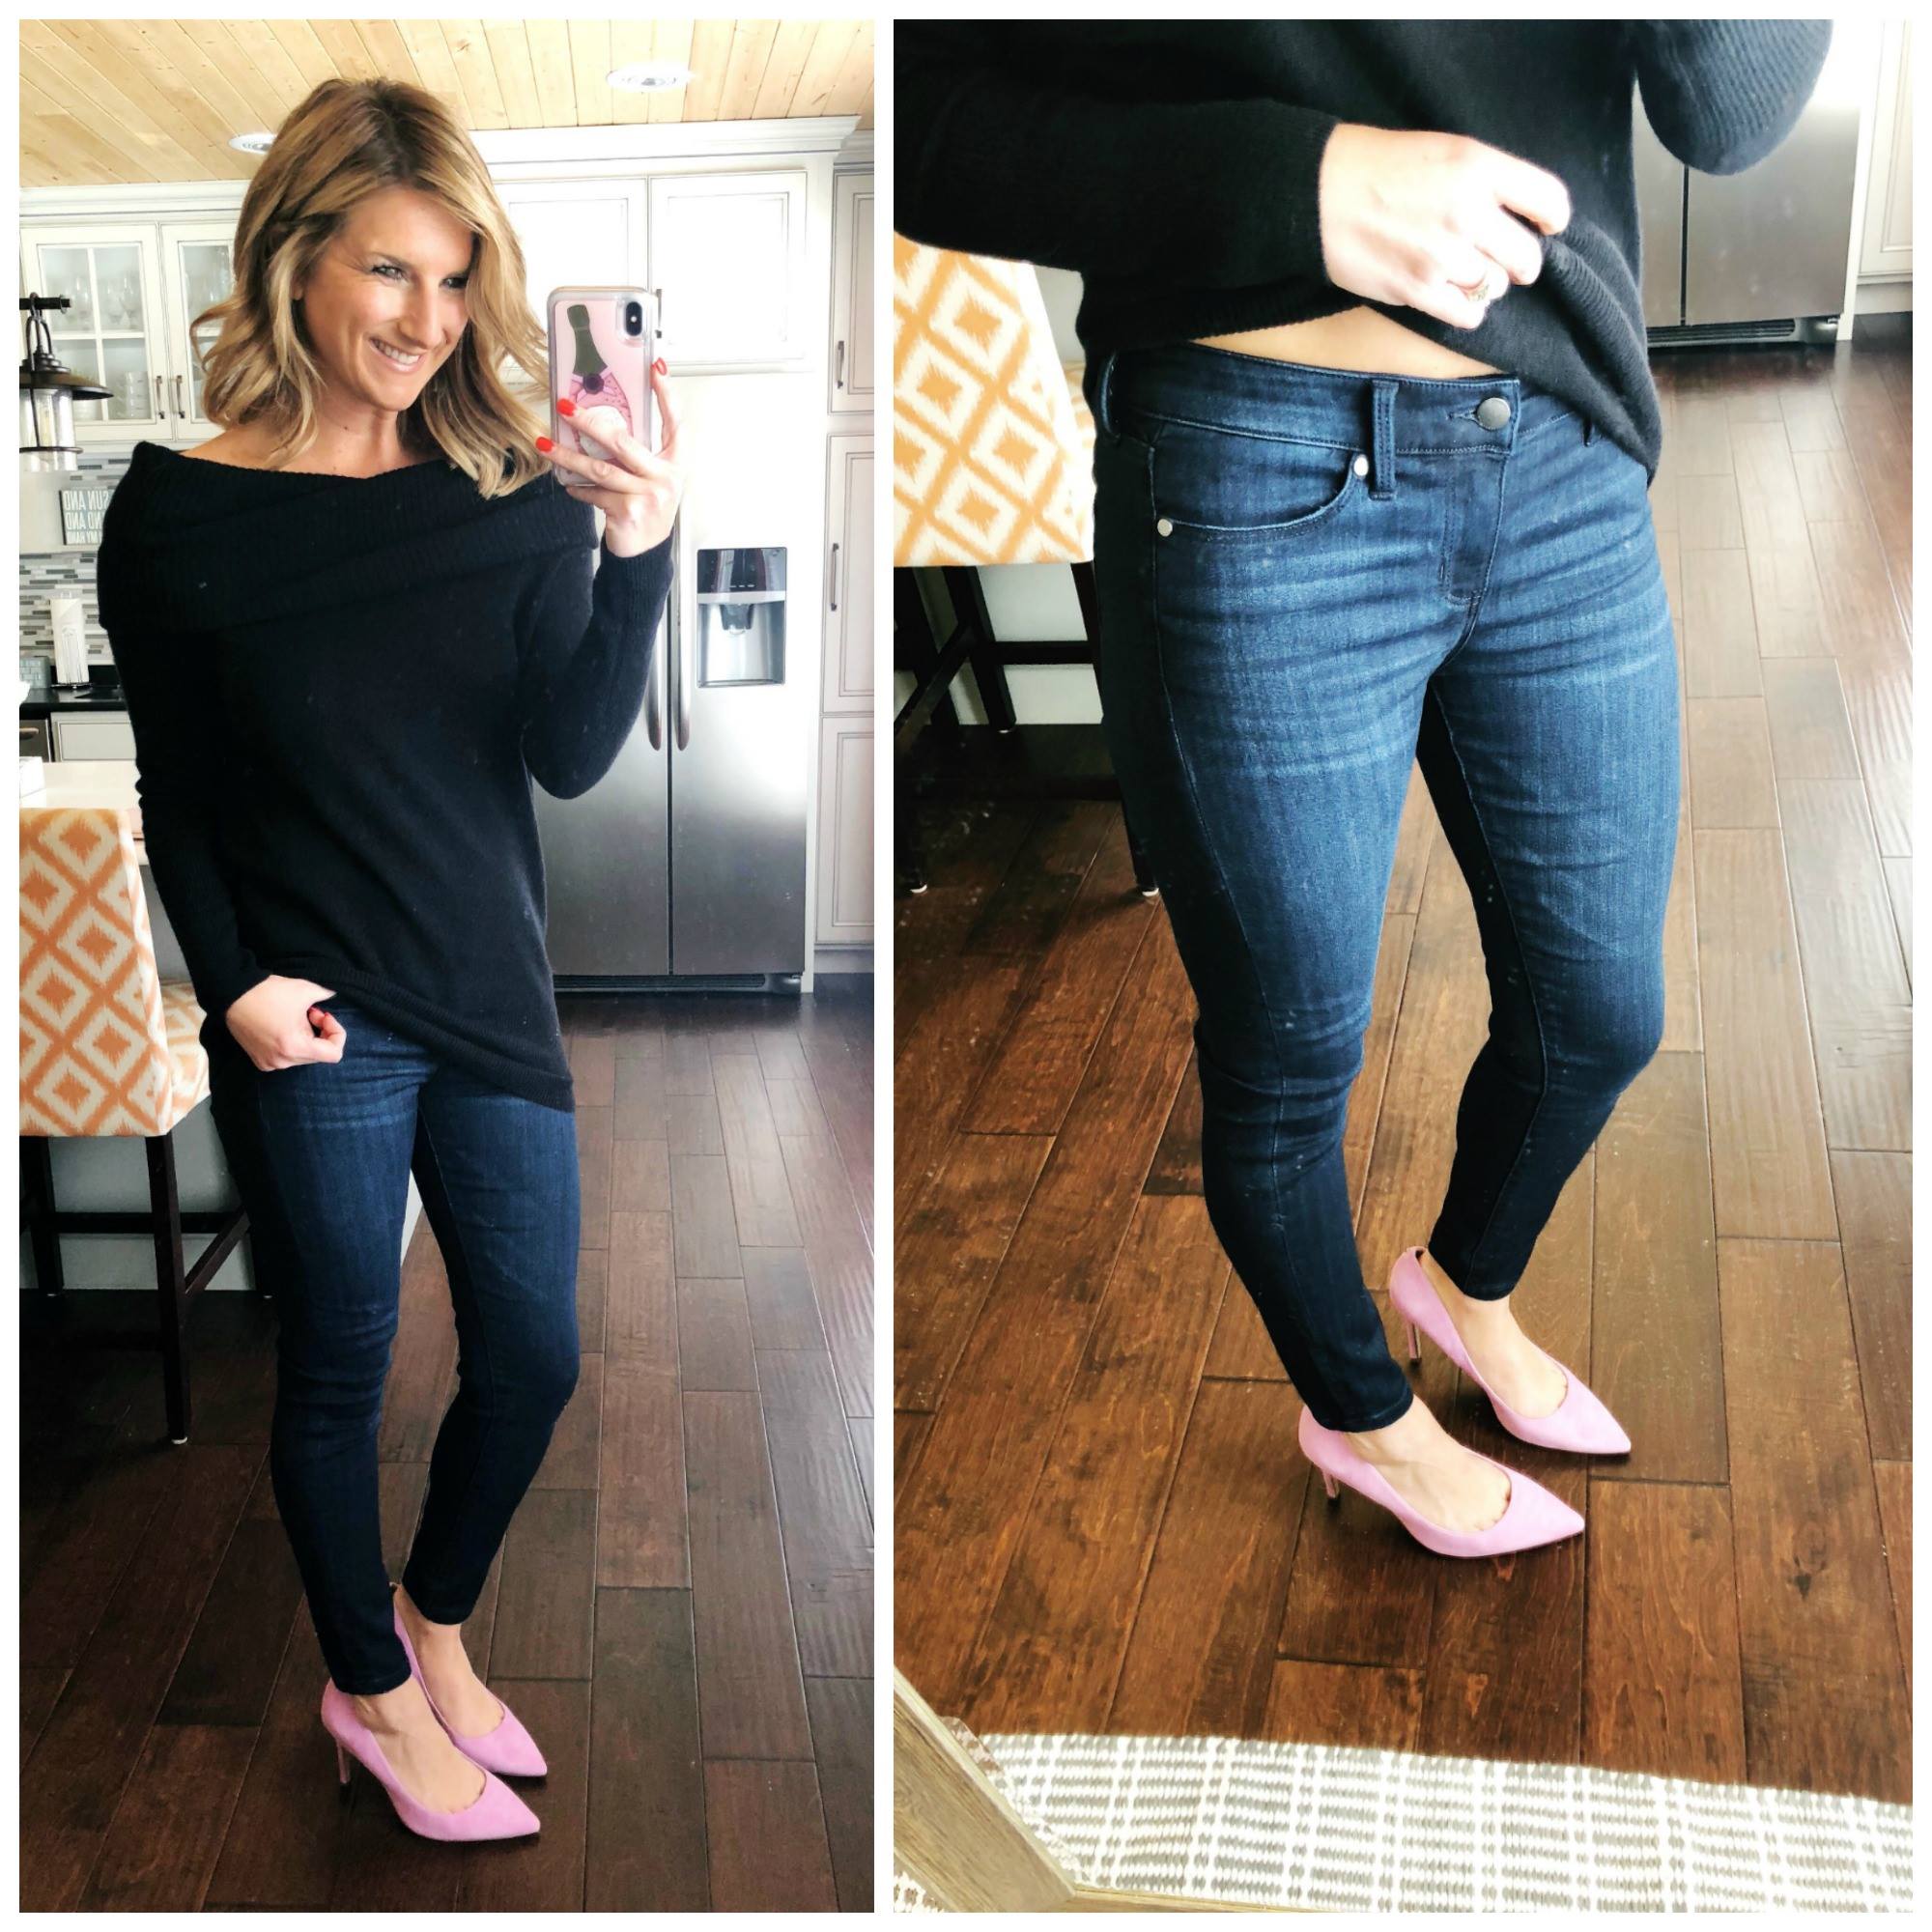 Off the Shoulder Top + Jeggings + Heels // Girls Night Out Outfit